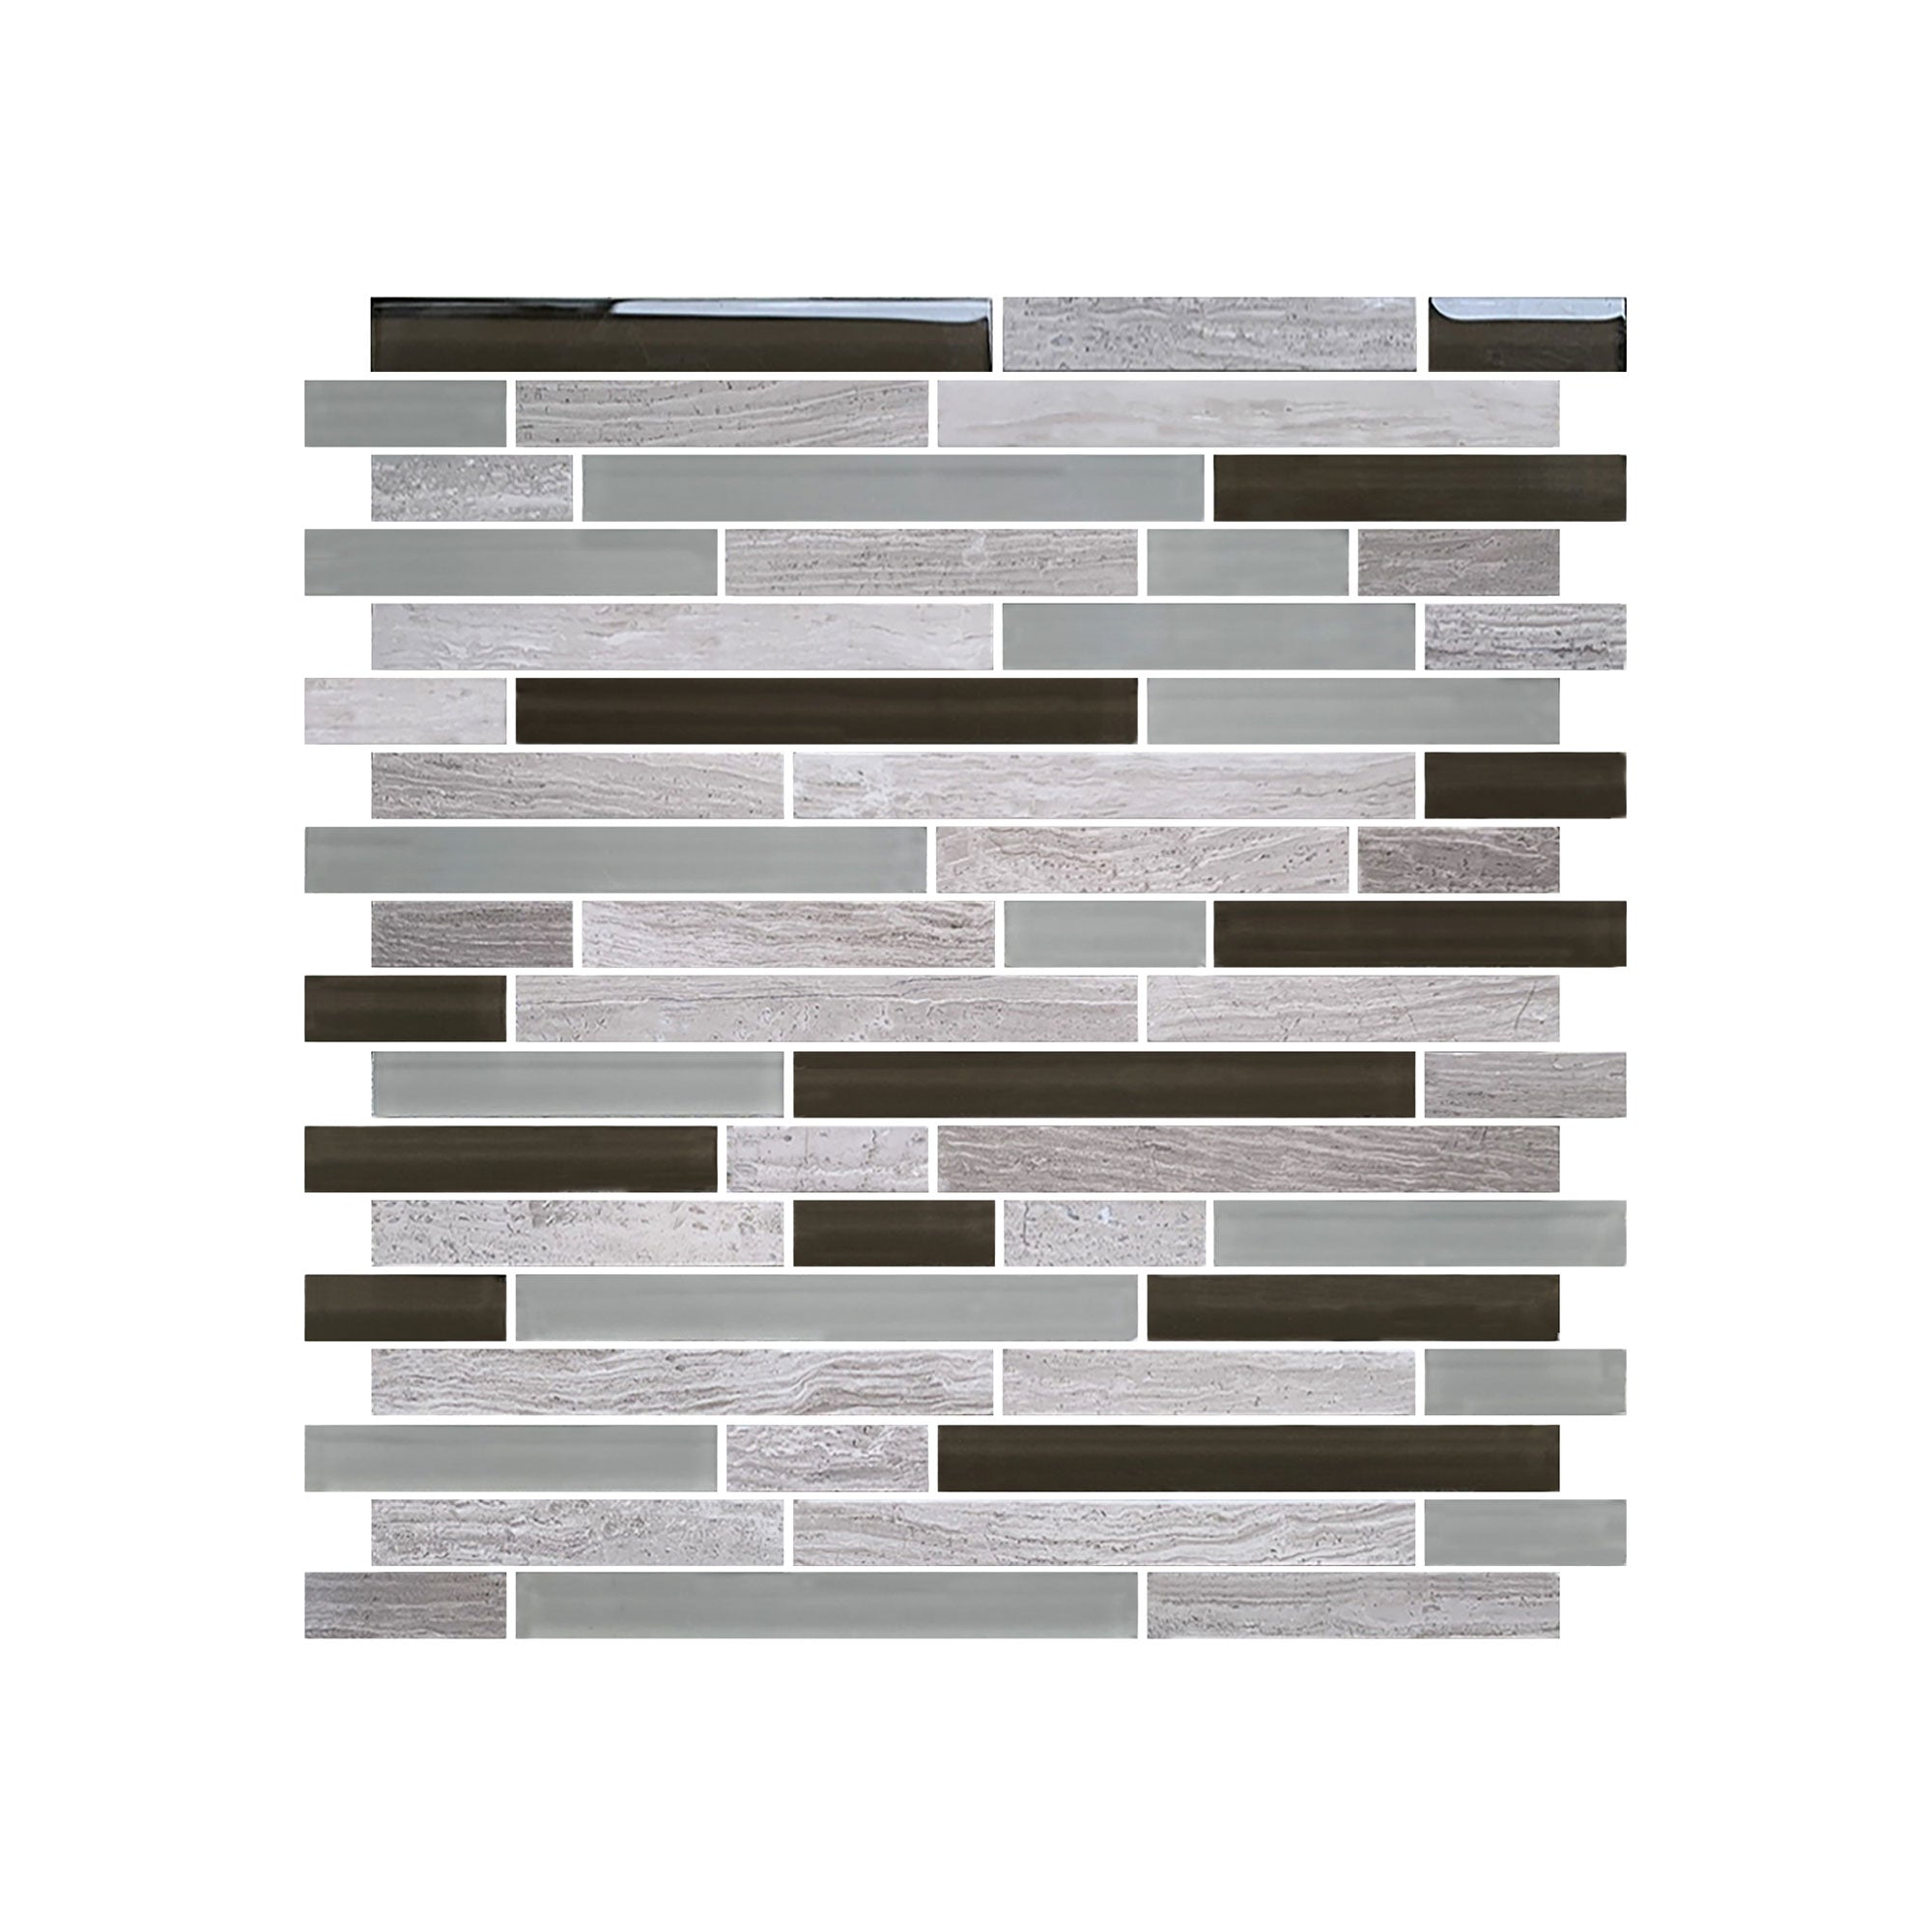 12 x 12 inch Glass Mosaic Tile with Tawny Color and Glossy & Frosted Finish